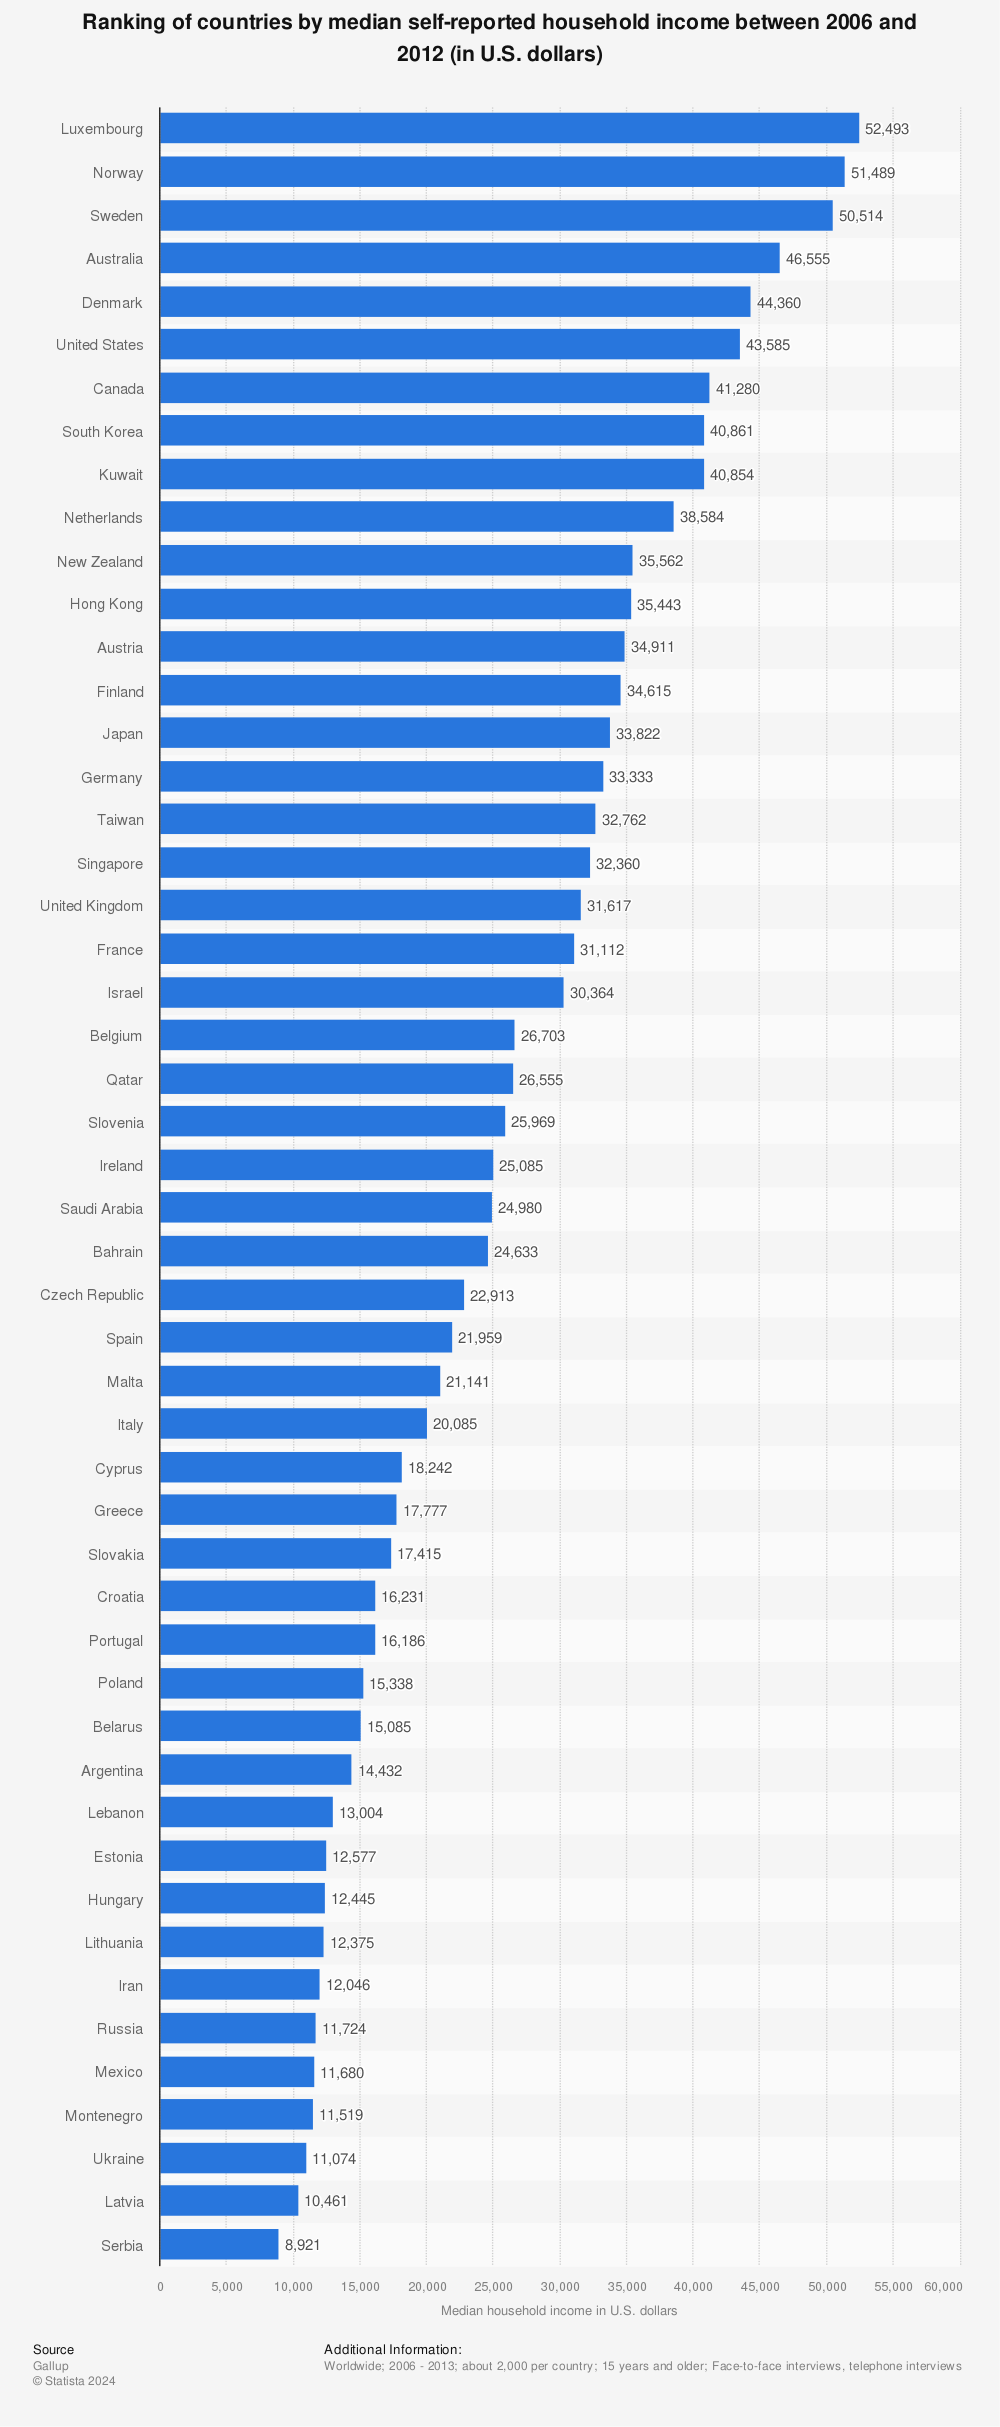 Statistic: Ranking of countries by median self-reported household income between 2006 and 2012 (in U.S. dollars) | Statista